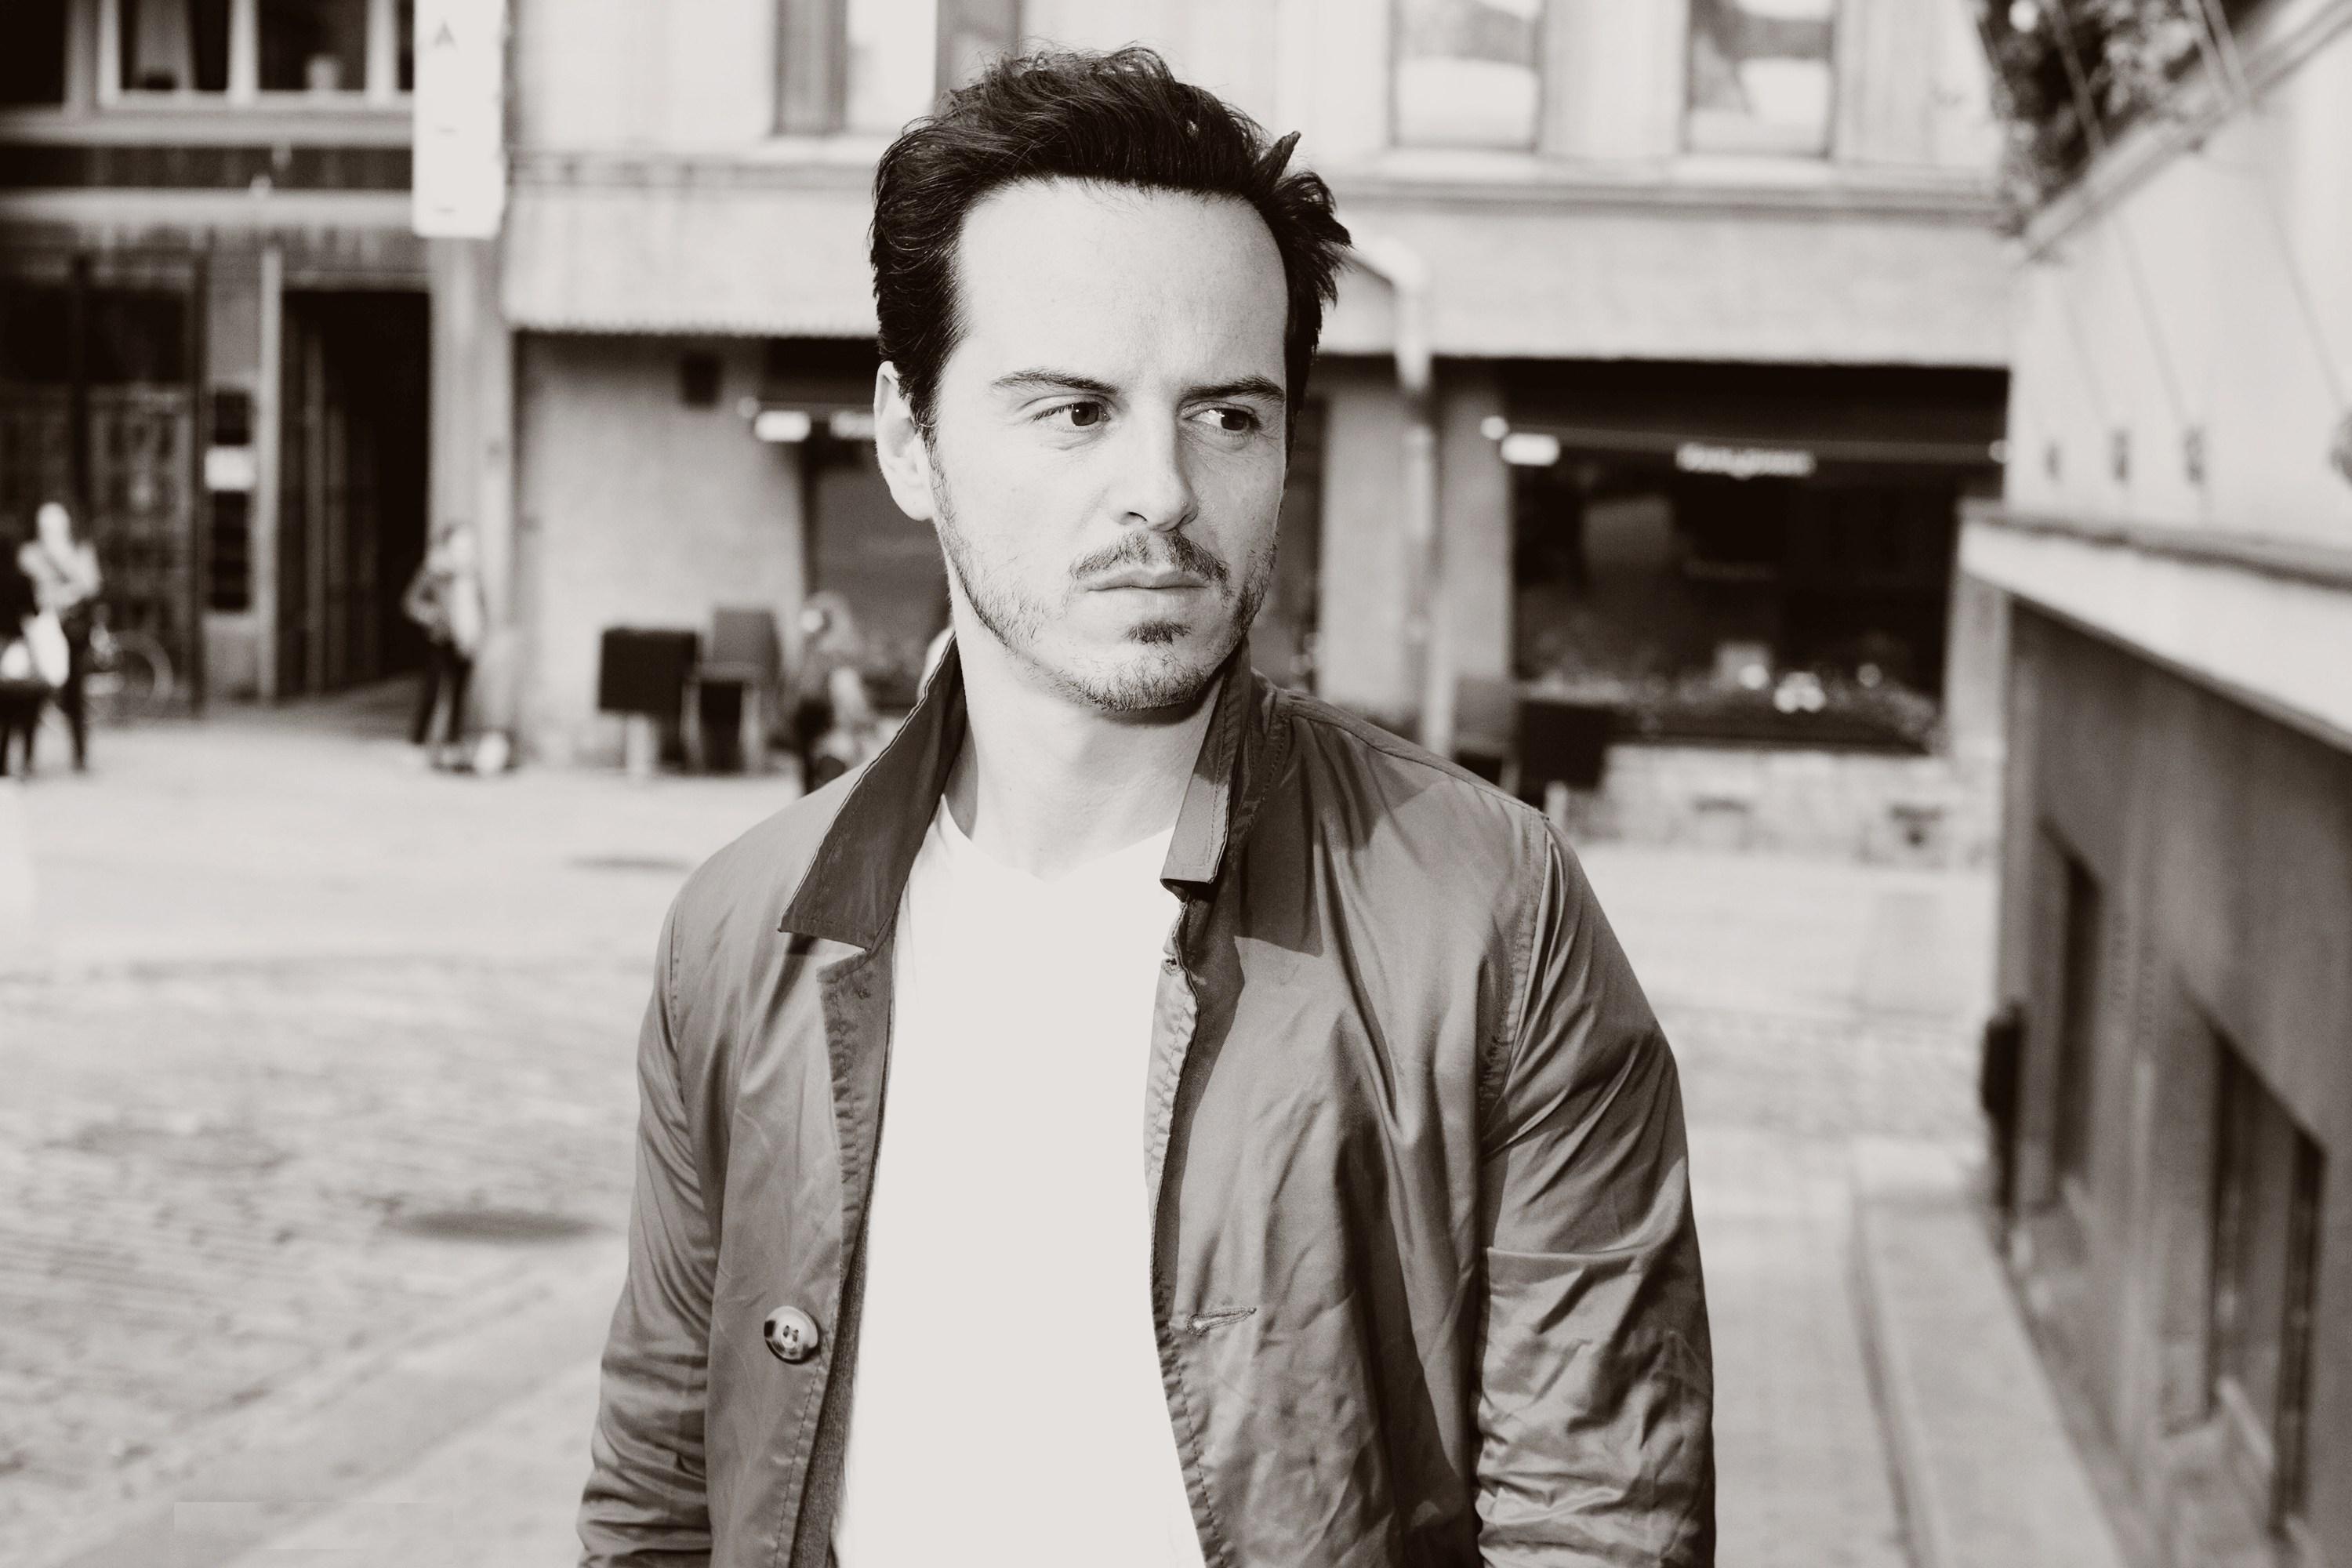 Andrew Scott Wallpapers Images Photos Pictures Backgrounds3000 x 2000